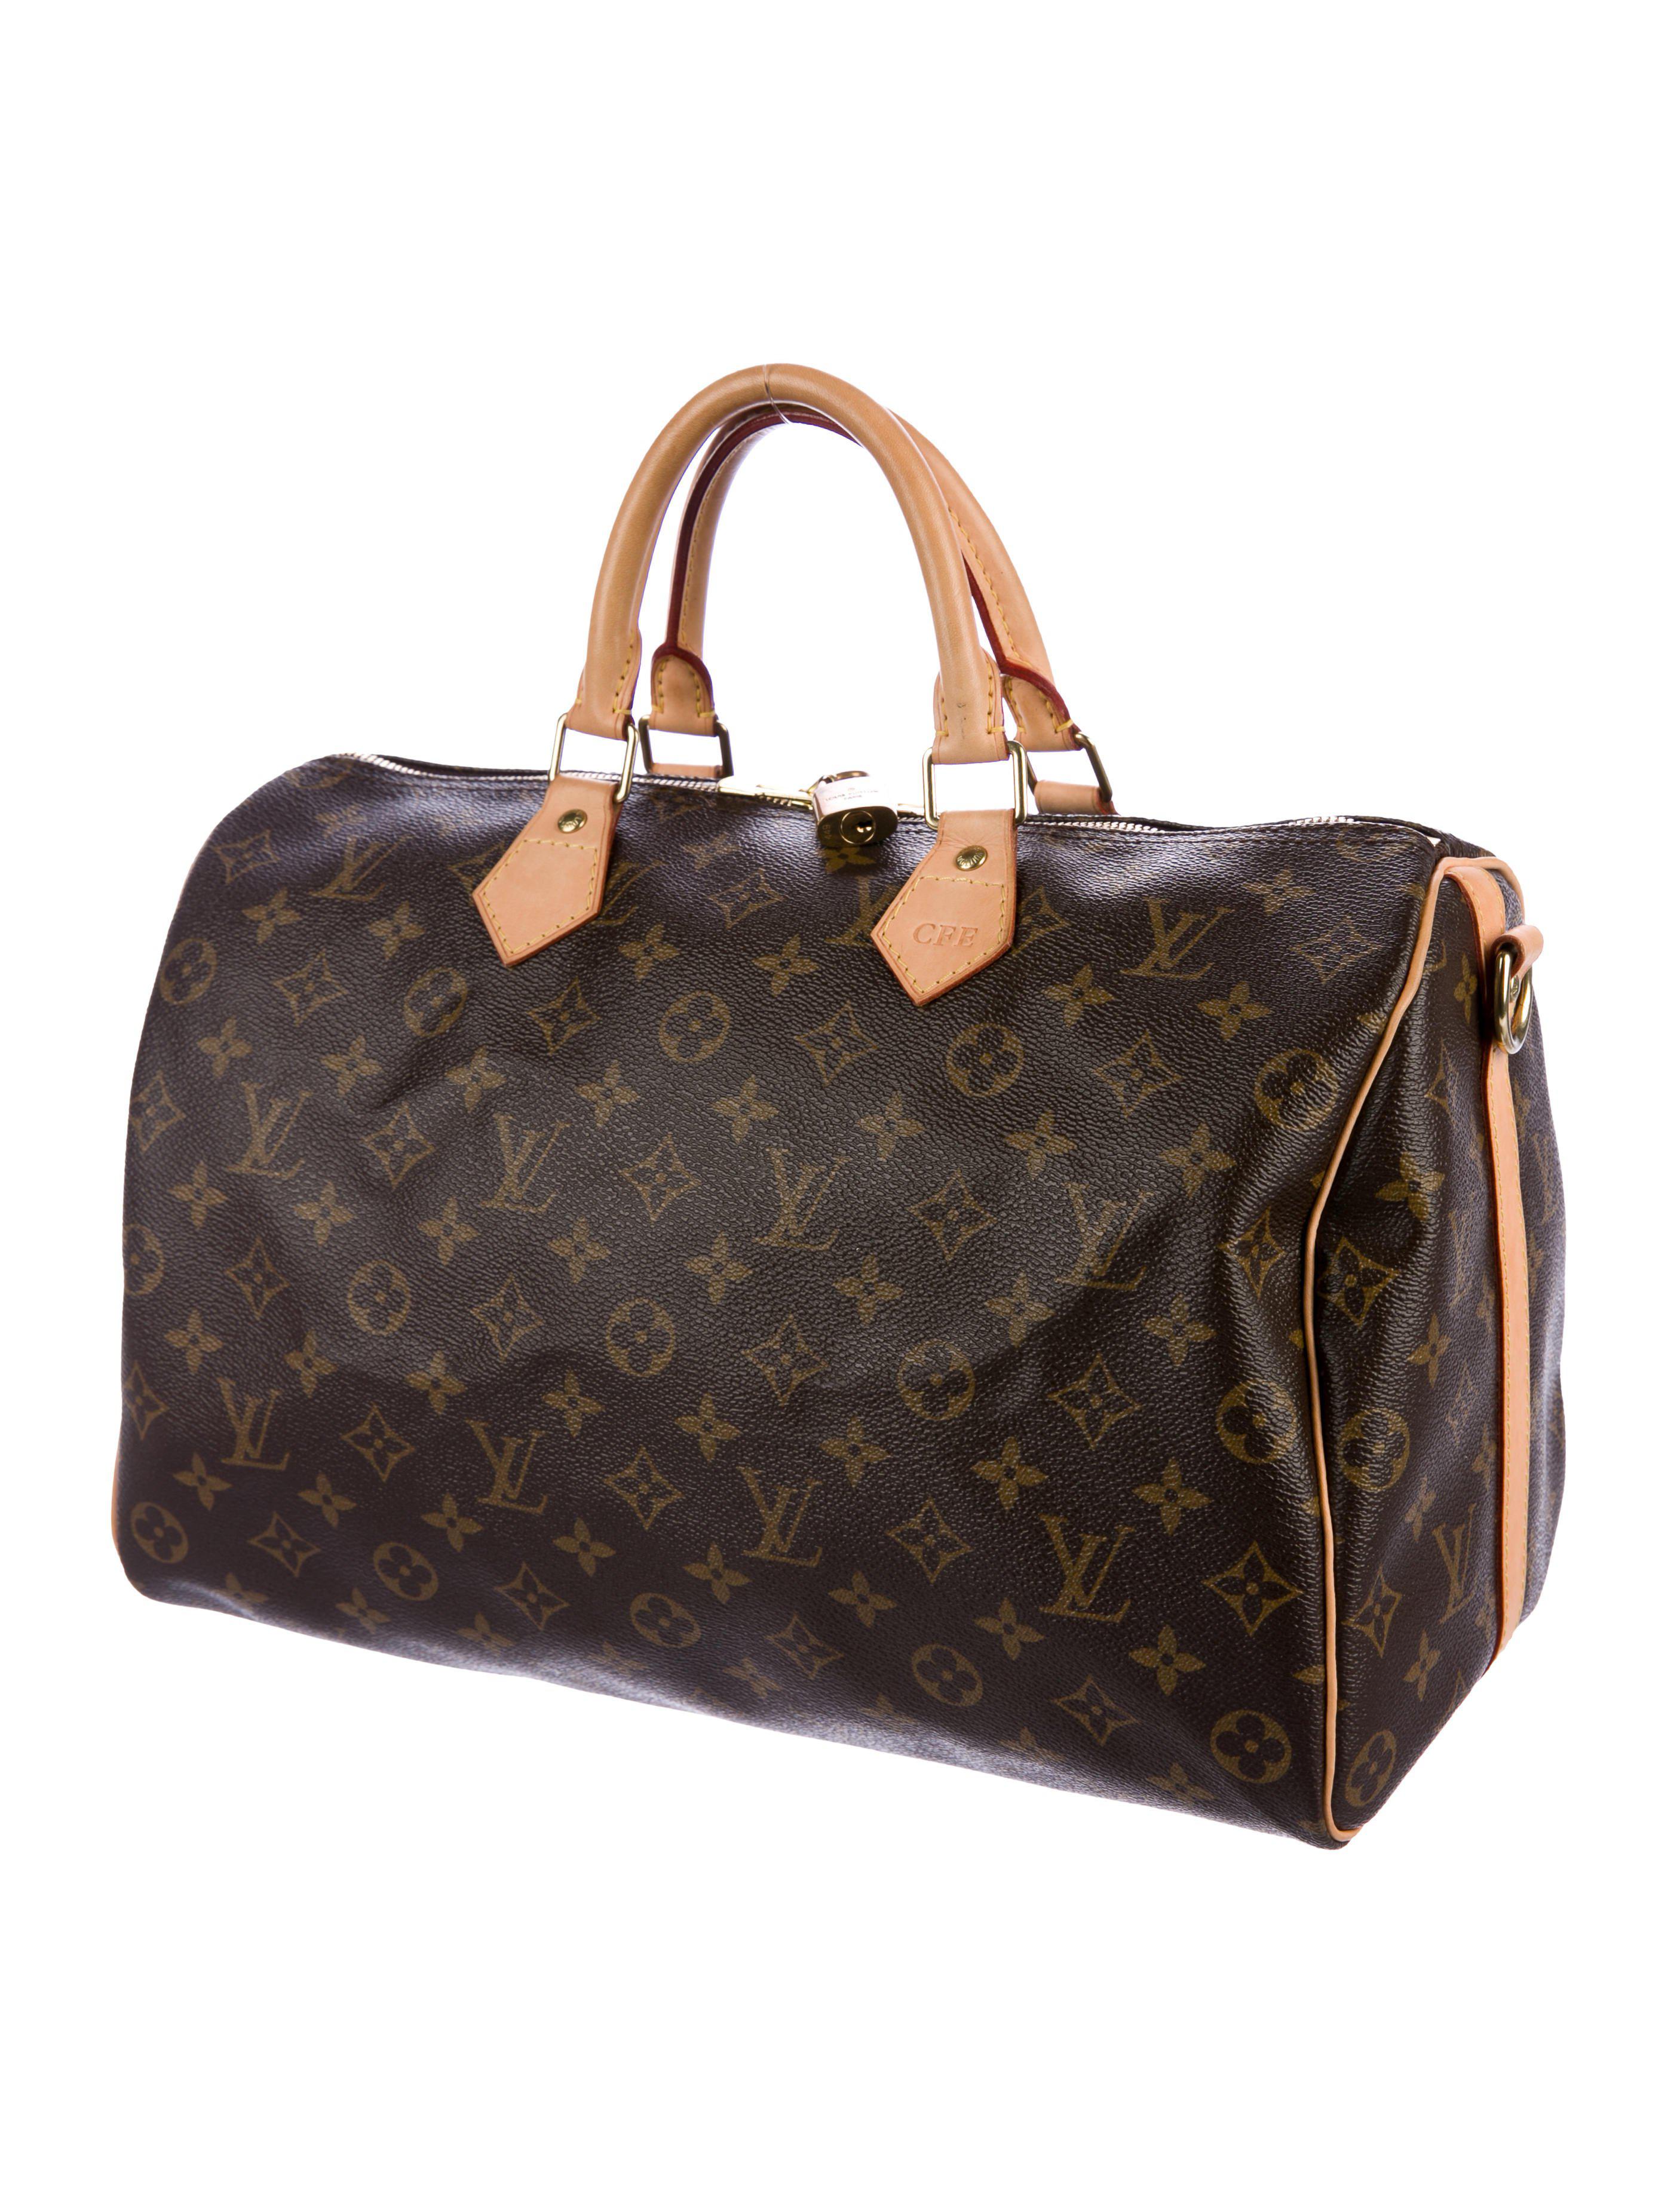 Louis Vuitton Into  Natural Resource Department